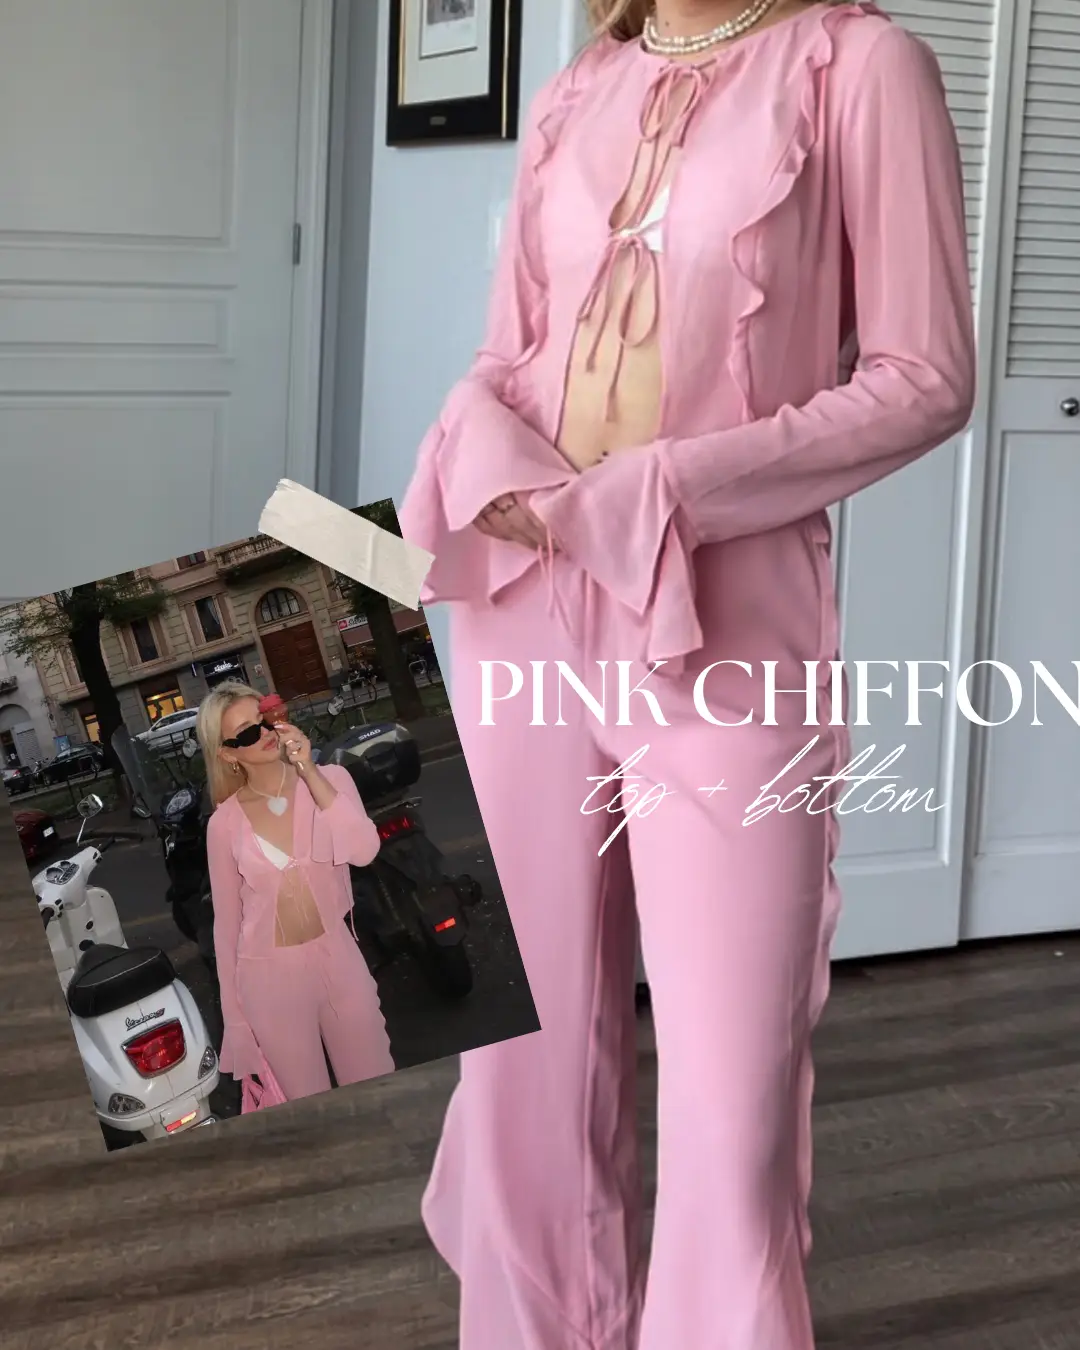 Pink Collection Tagged Lumpectomy - Chérie Amour